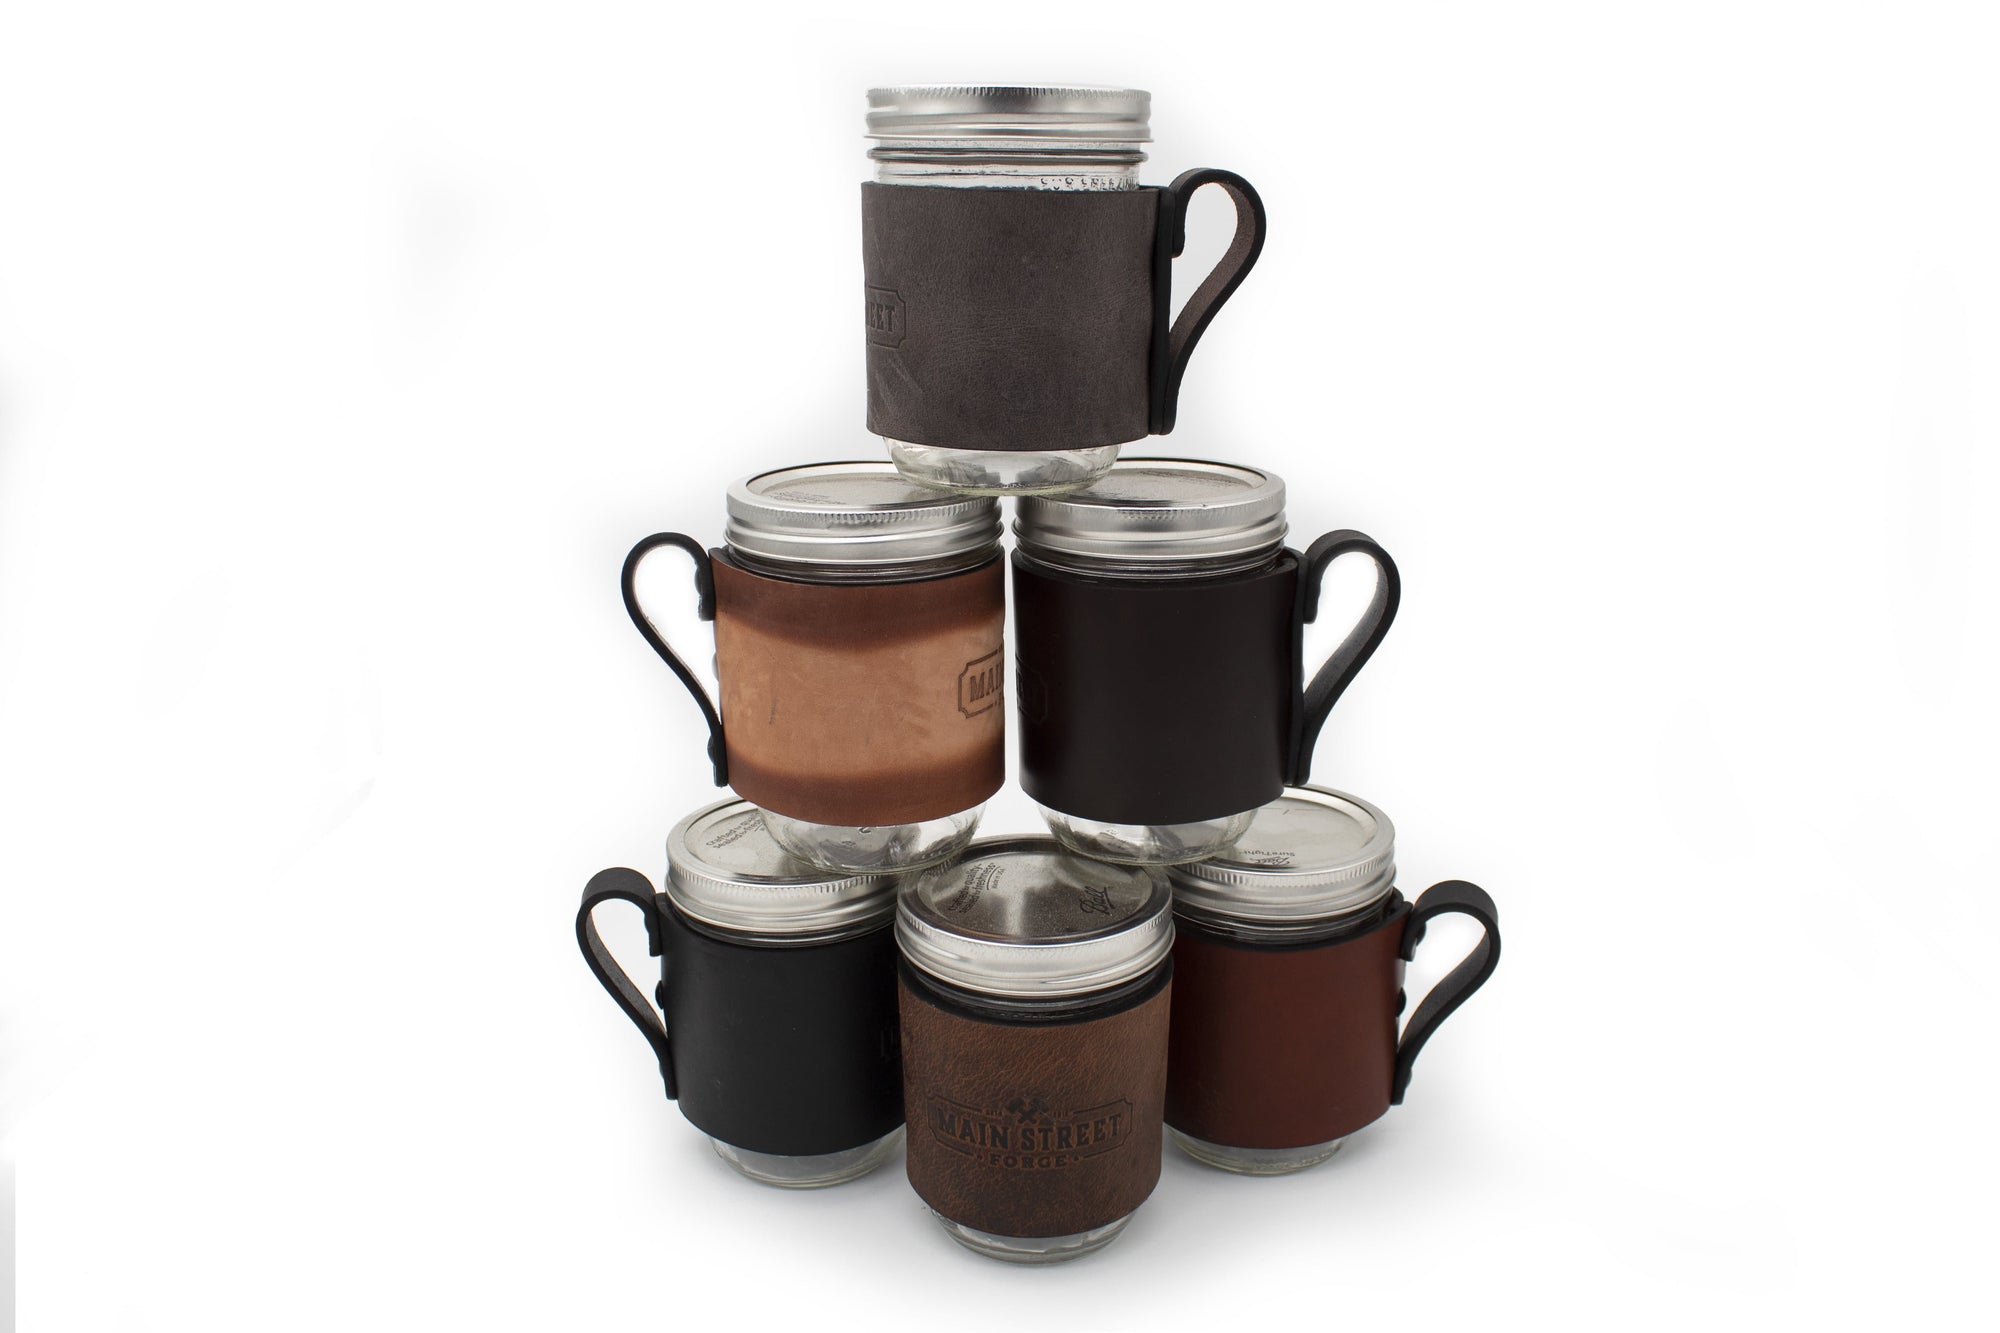 Leather Mason Jar Sleeves by LM Products – LM Leather Goods